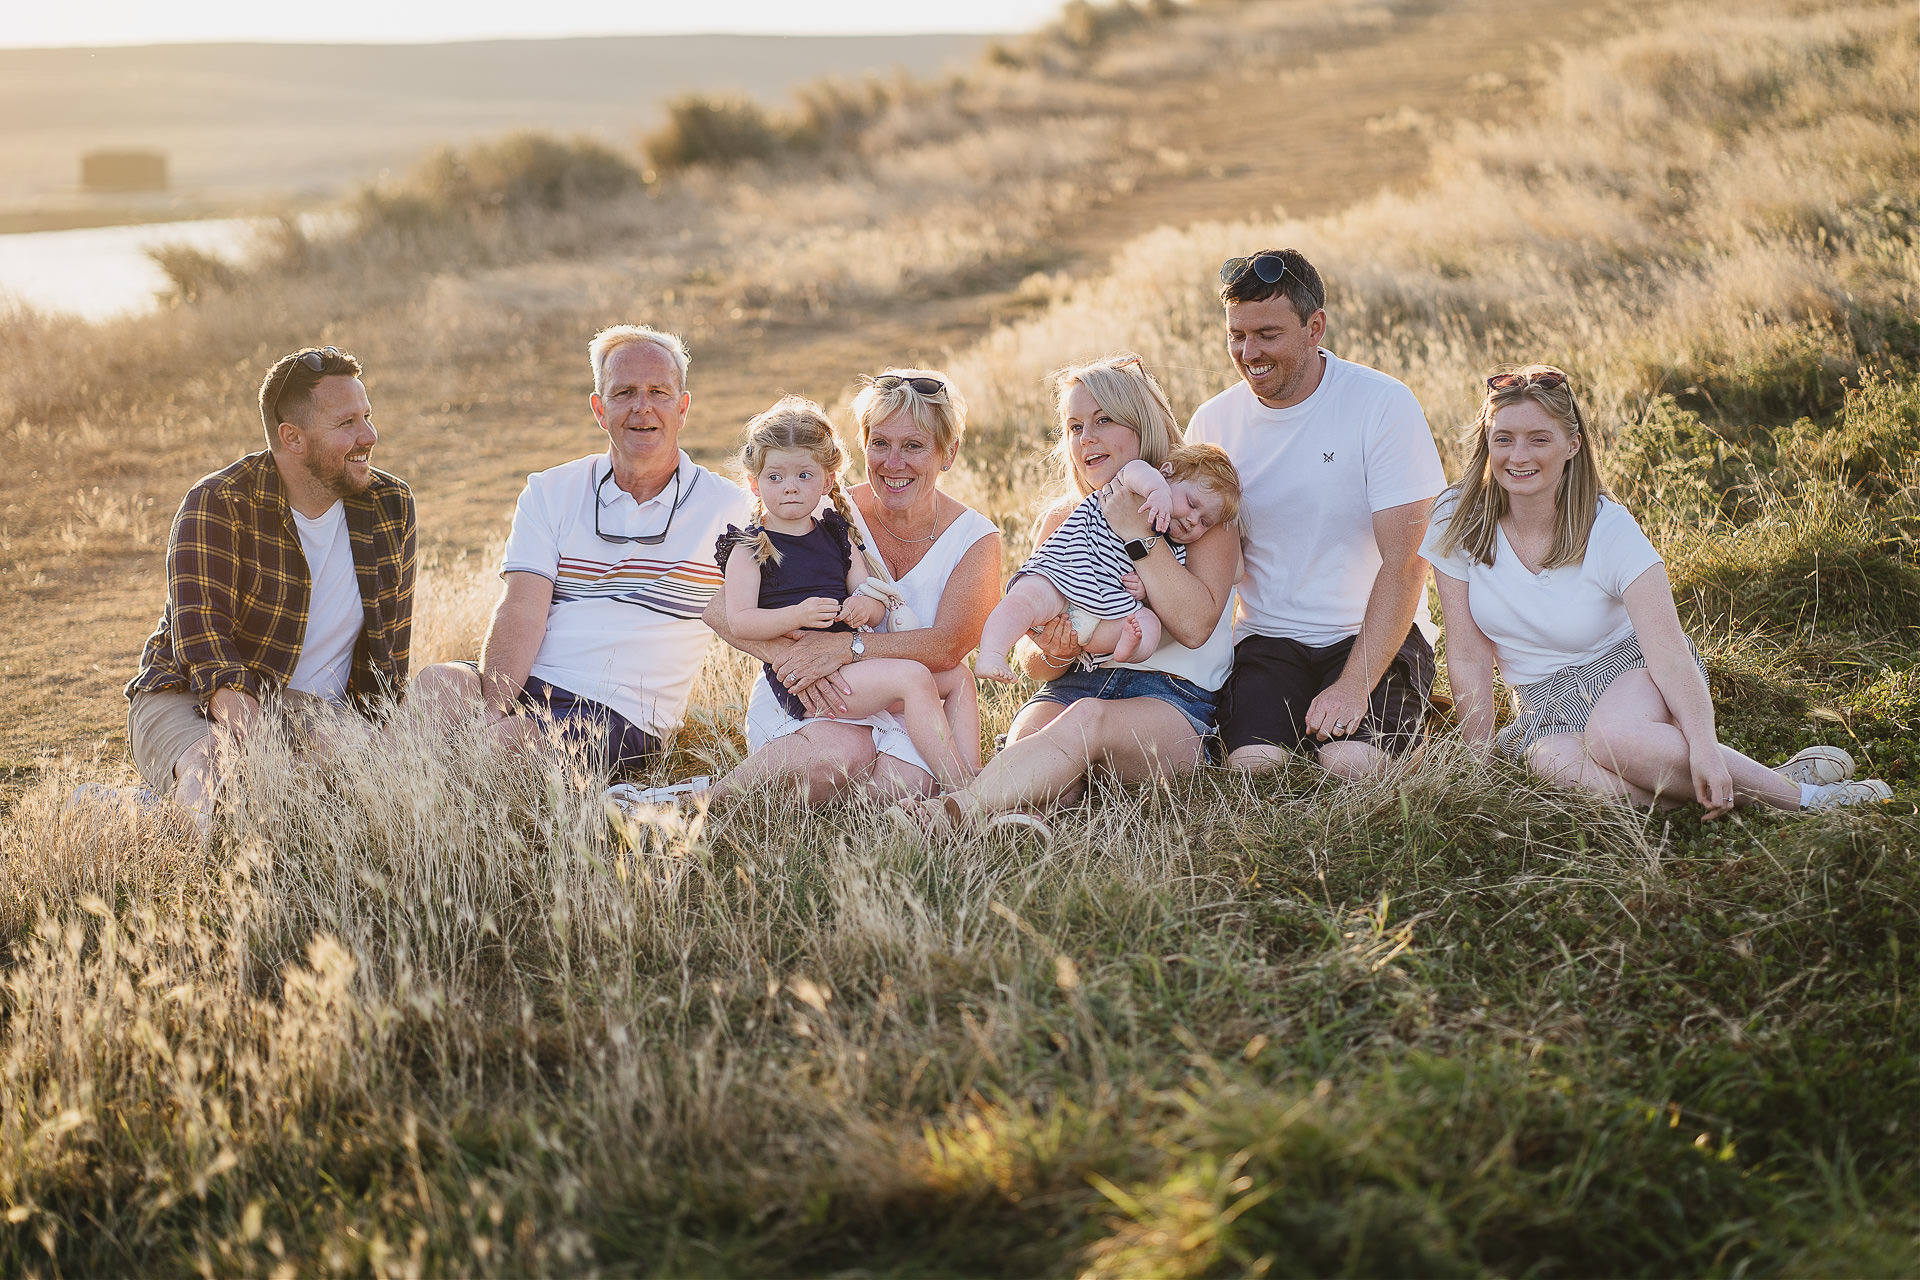 An extended family group photograph sitting in grass in a sunset